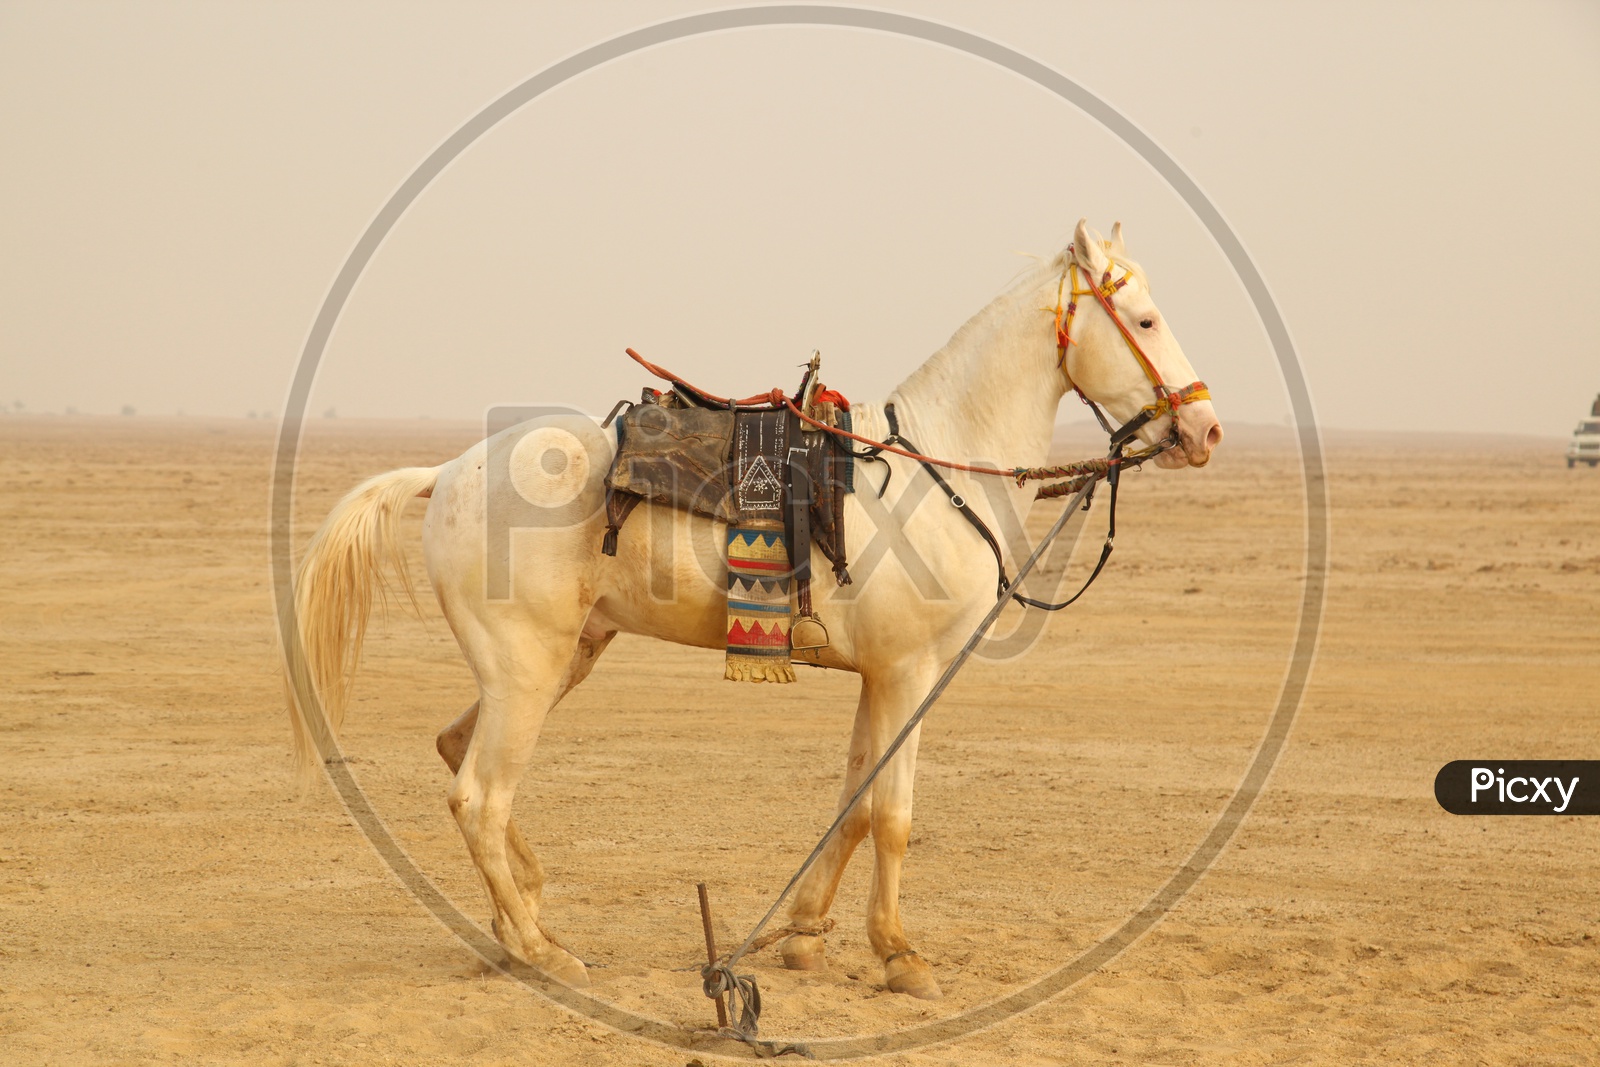 A tied up horse in the desert